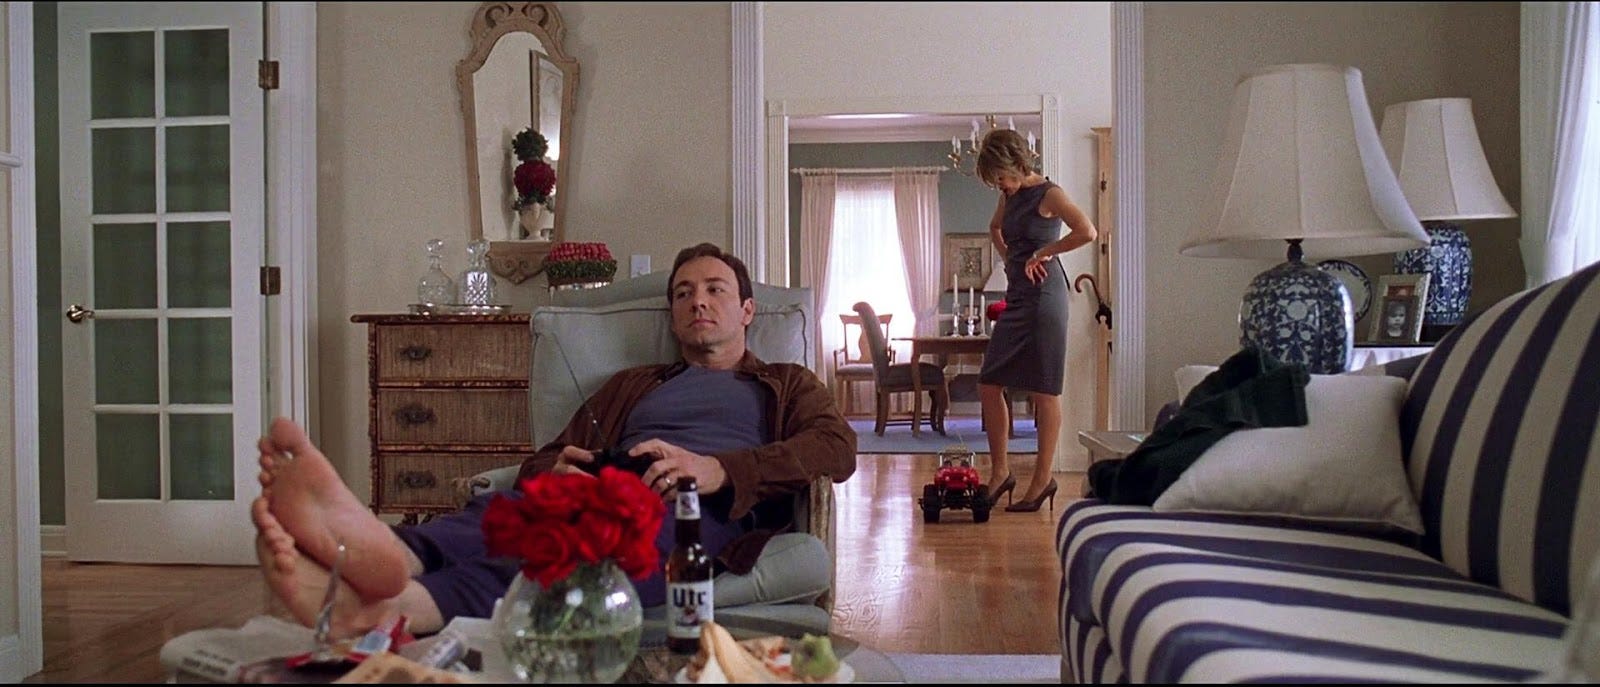 american beauty kevin spacey